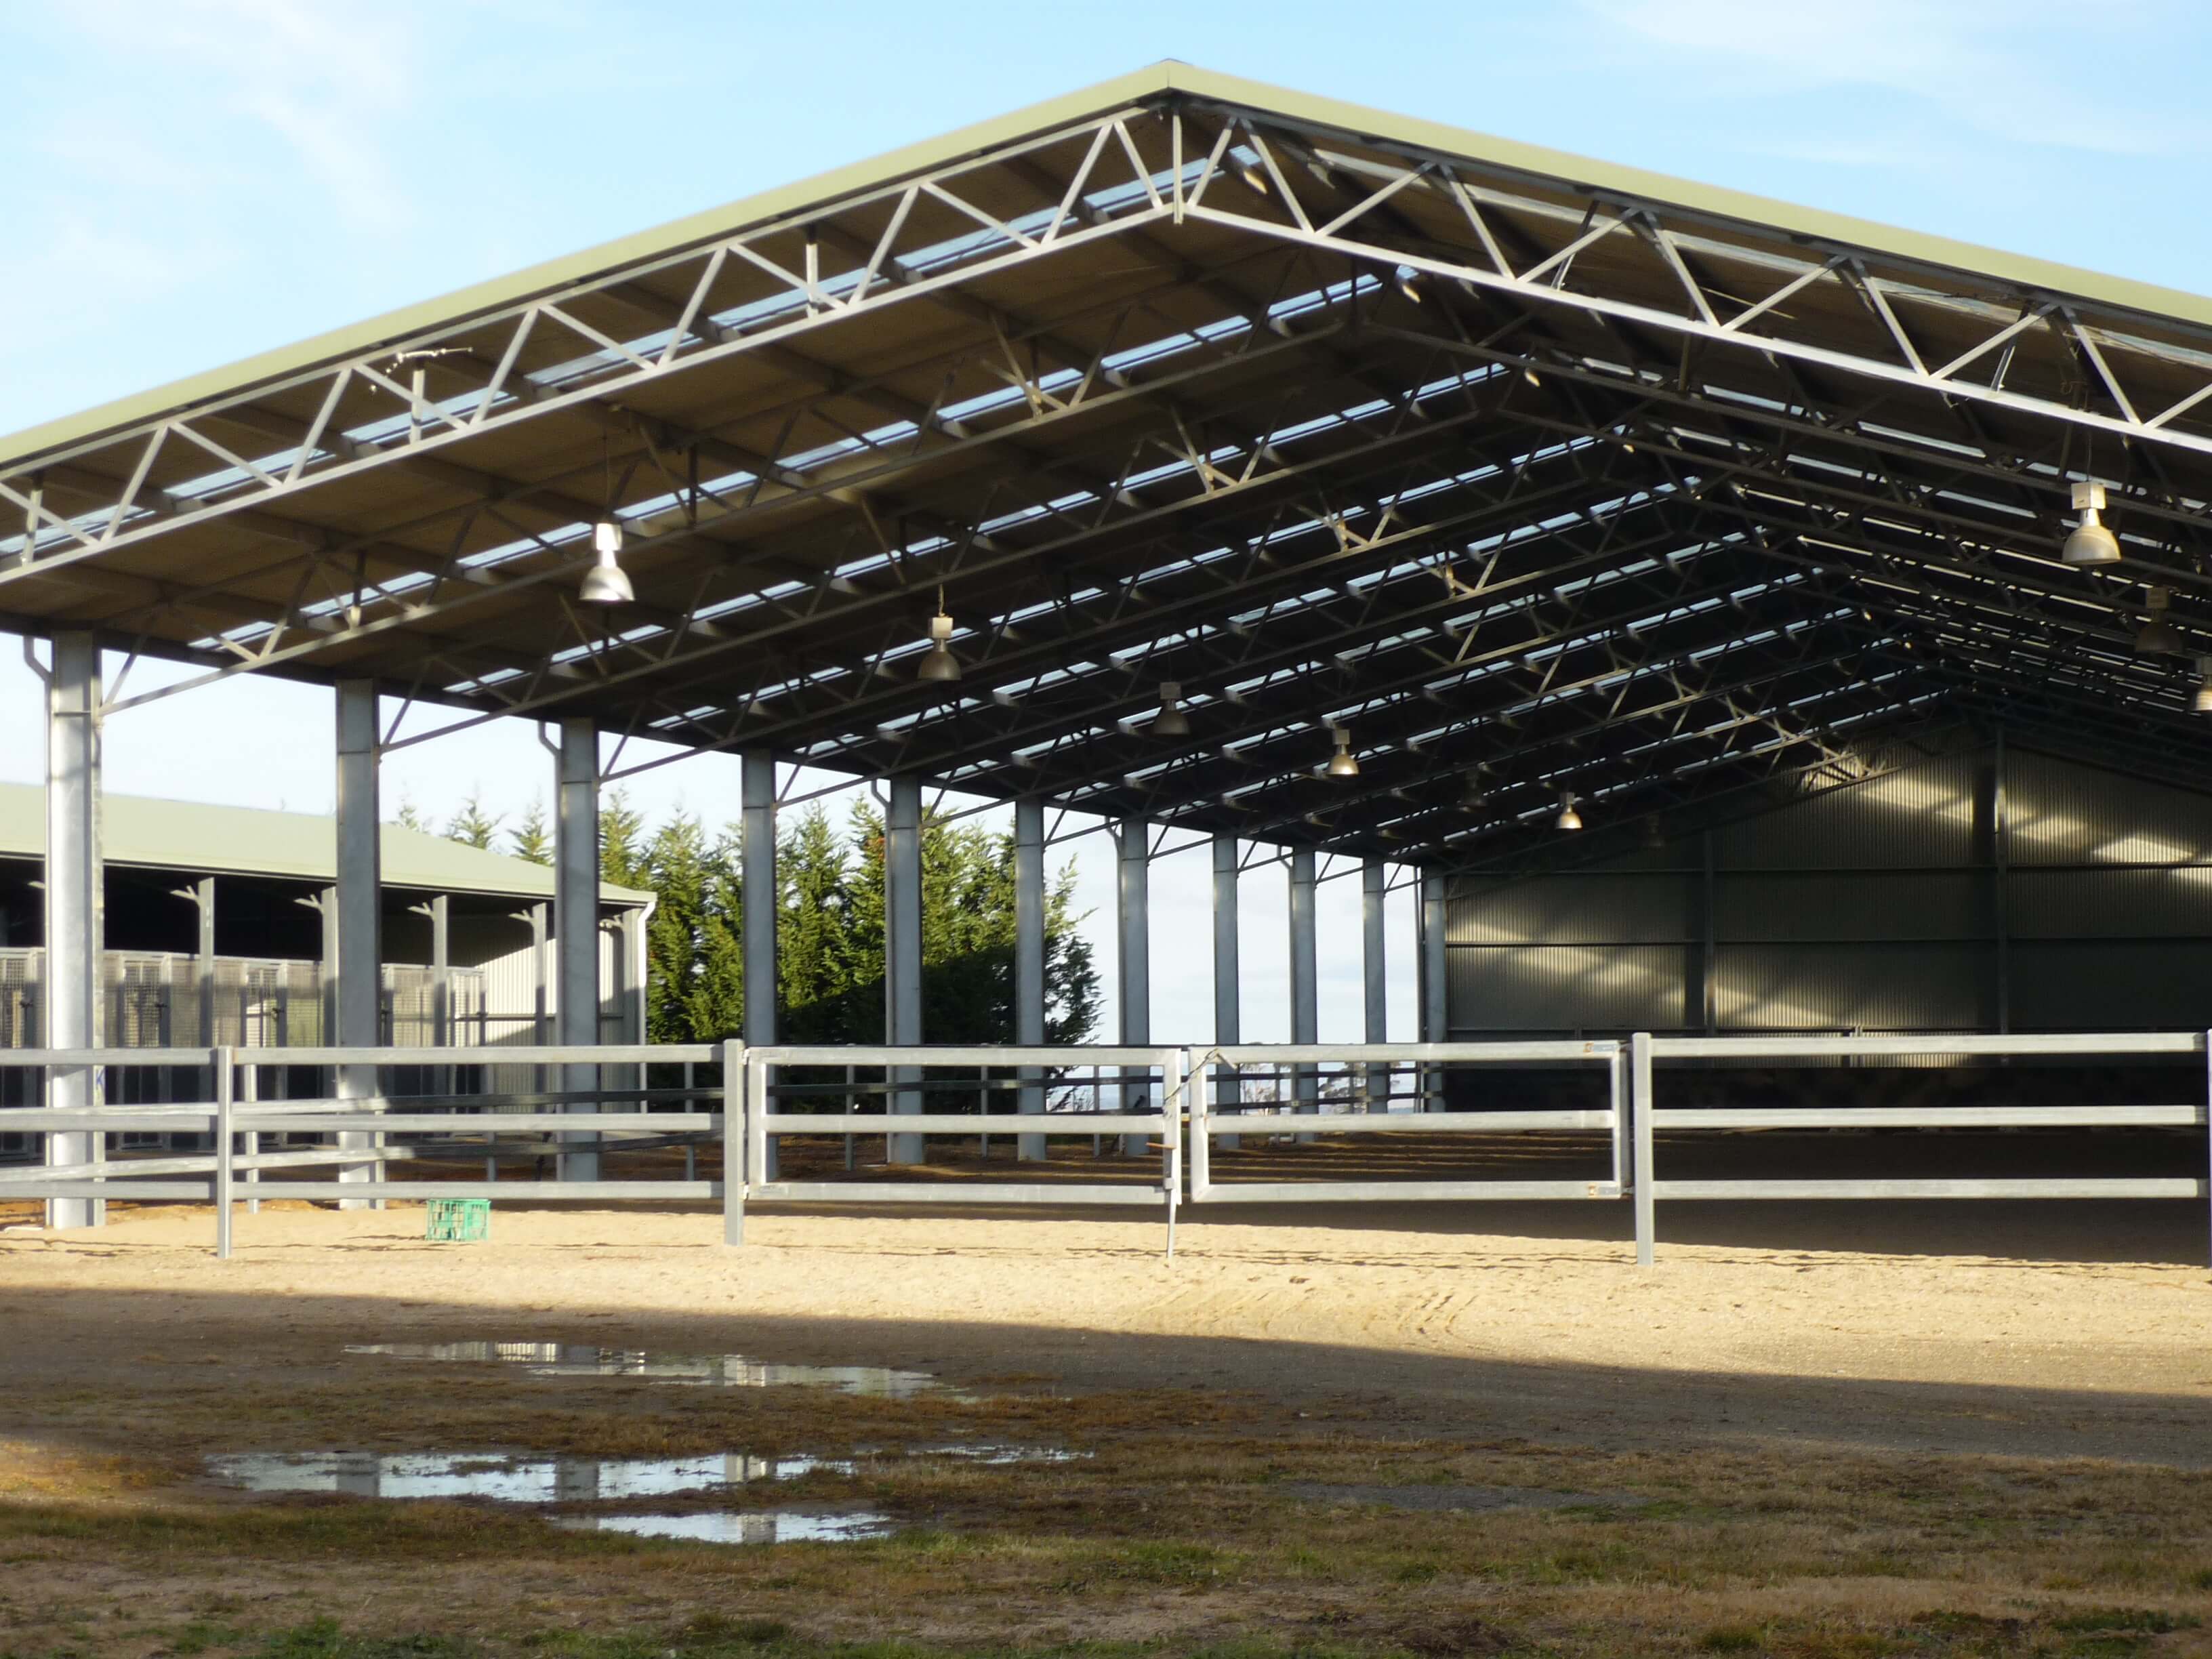 ABC Sheds horse arena in Crookwell NSW